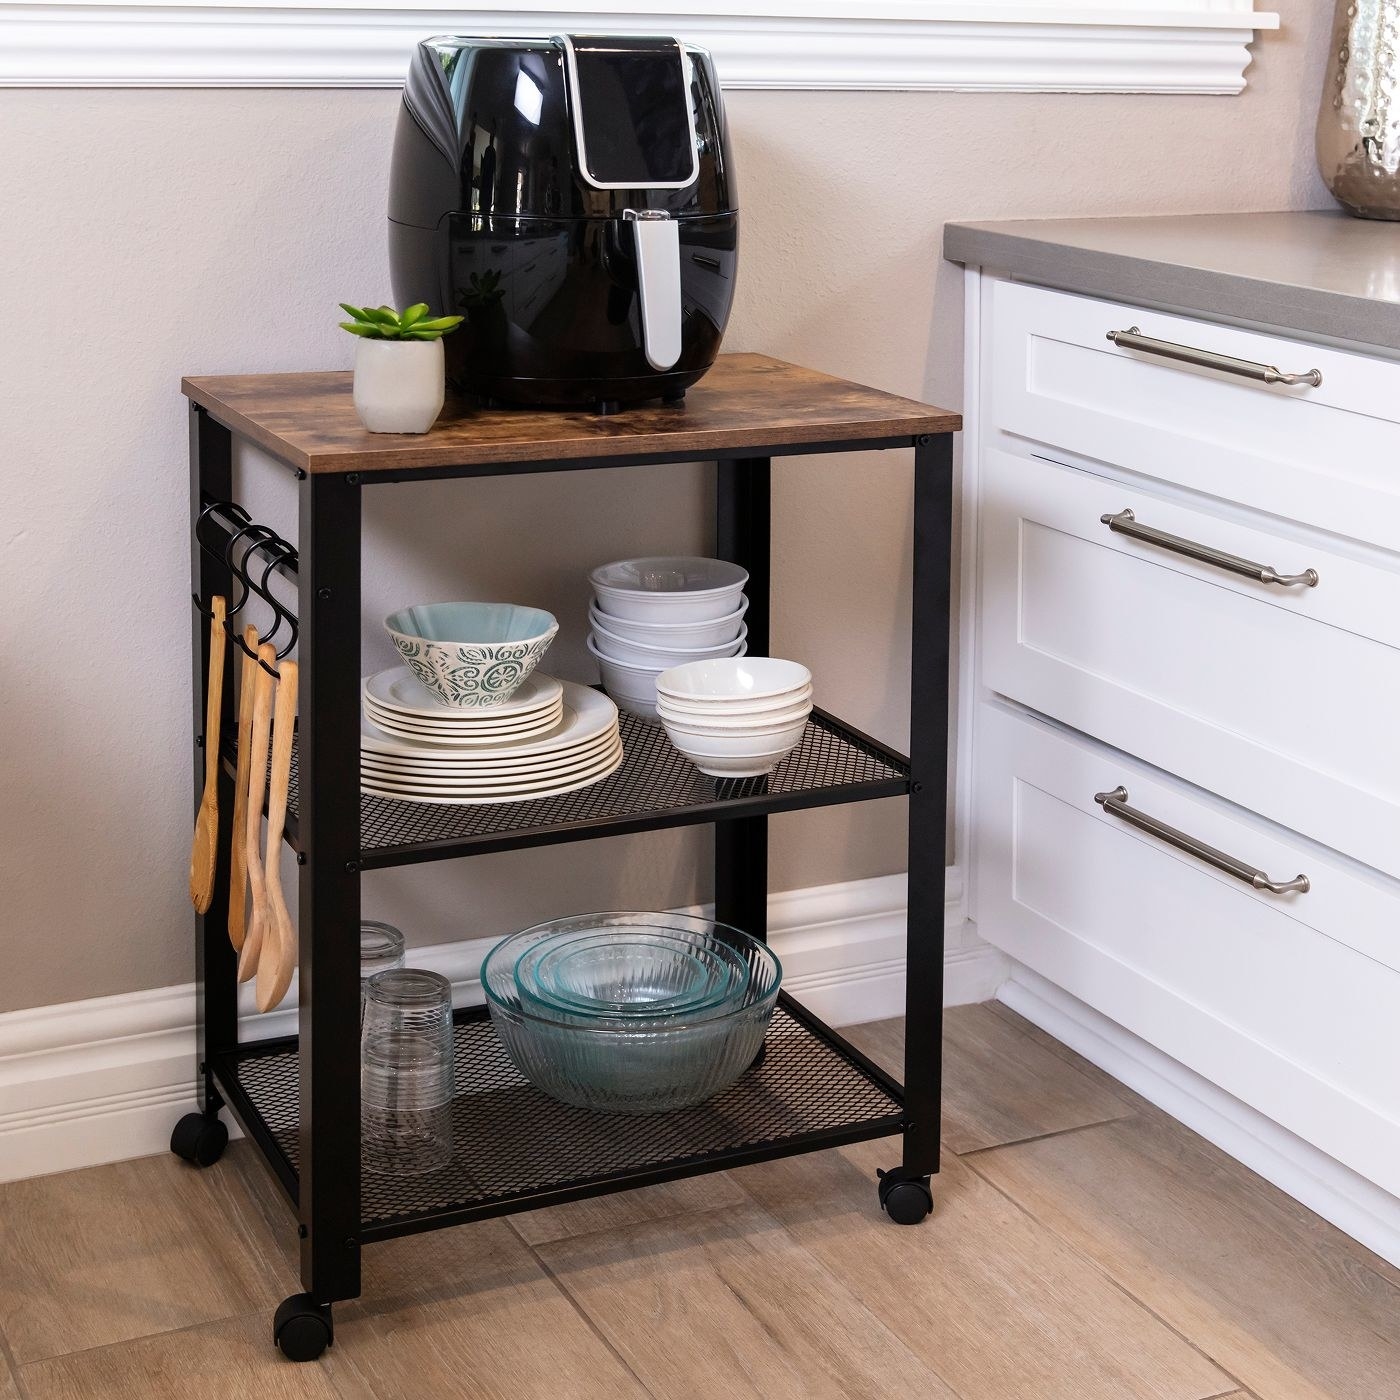 the black metal mesh and wood top cart with dishes and appliances